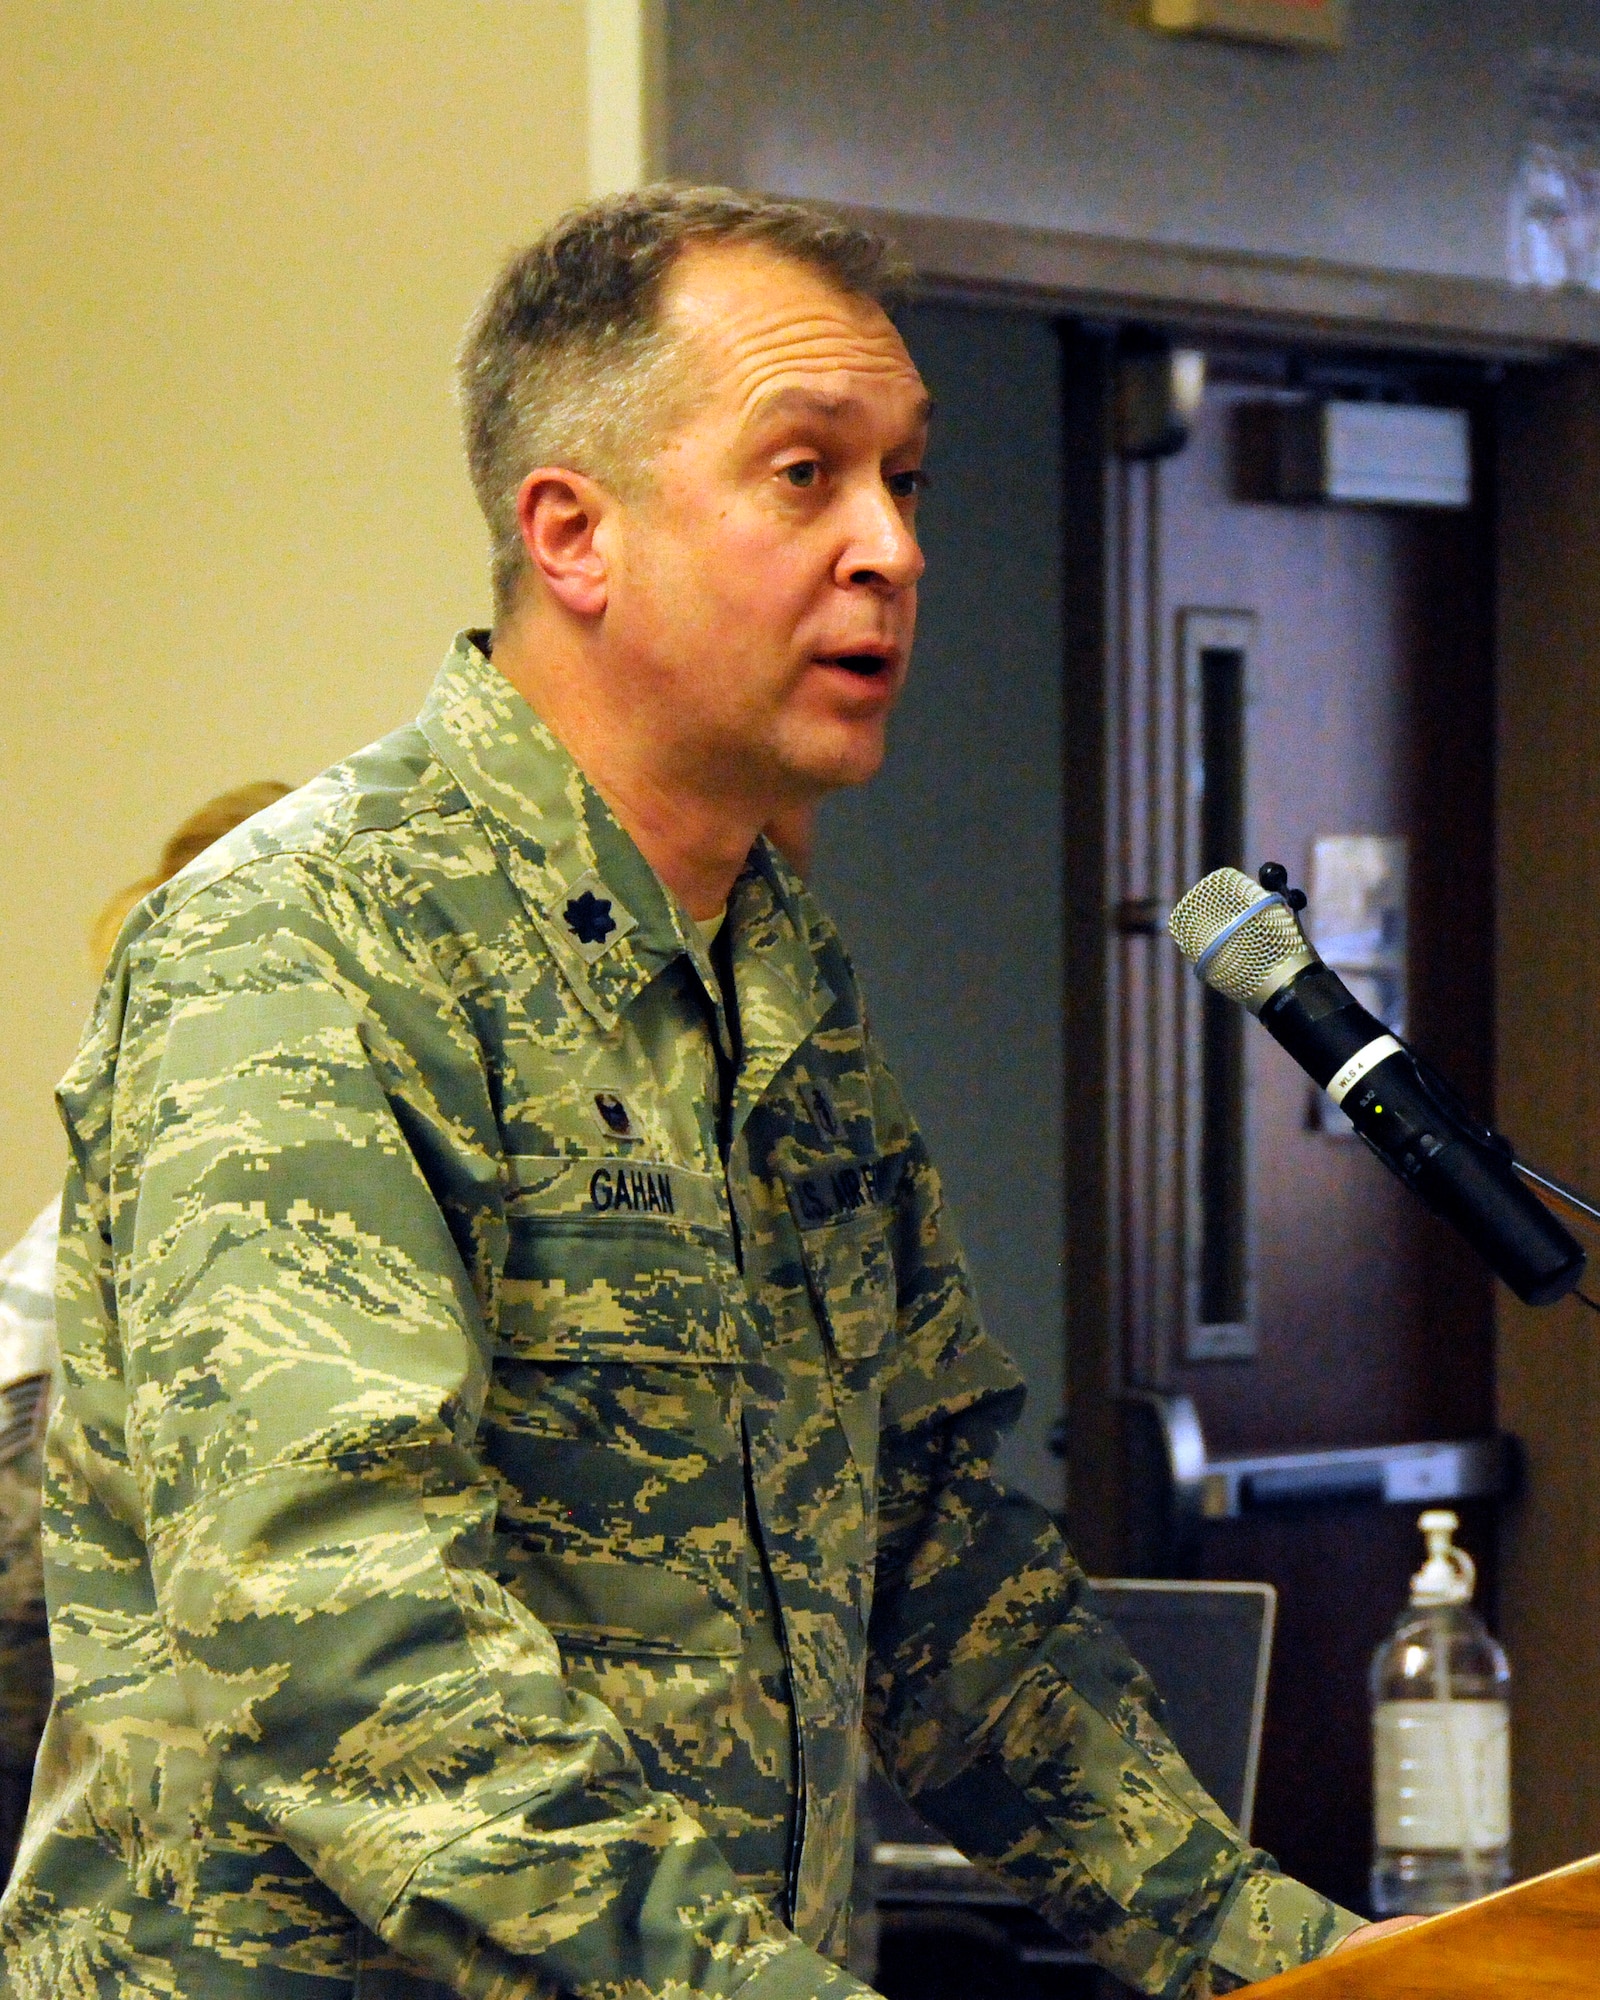 Lt. Col. Brian Gahan addresses unit members of the 182nd Medical Group following an activation ceremony  for 182 MDG Det 1, held Mar. 3, 2016 in Peoria, Ill. Gahan assumed command of the newly formed CERFP detachment. U.S. Air National Guard photo by Tech. Sgt. Todd A. Pendleton  